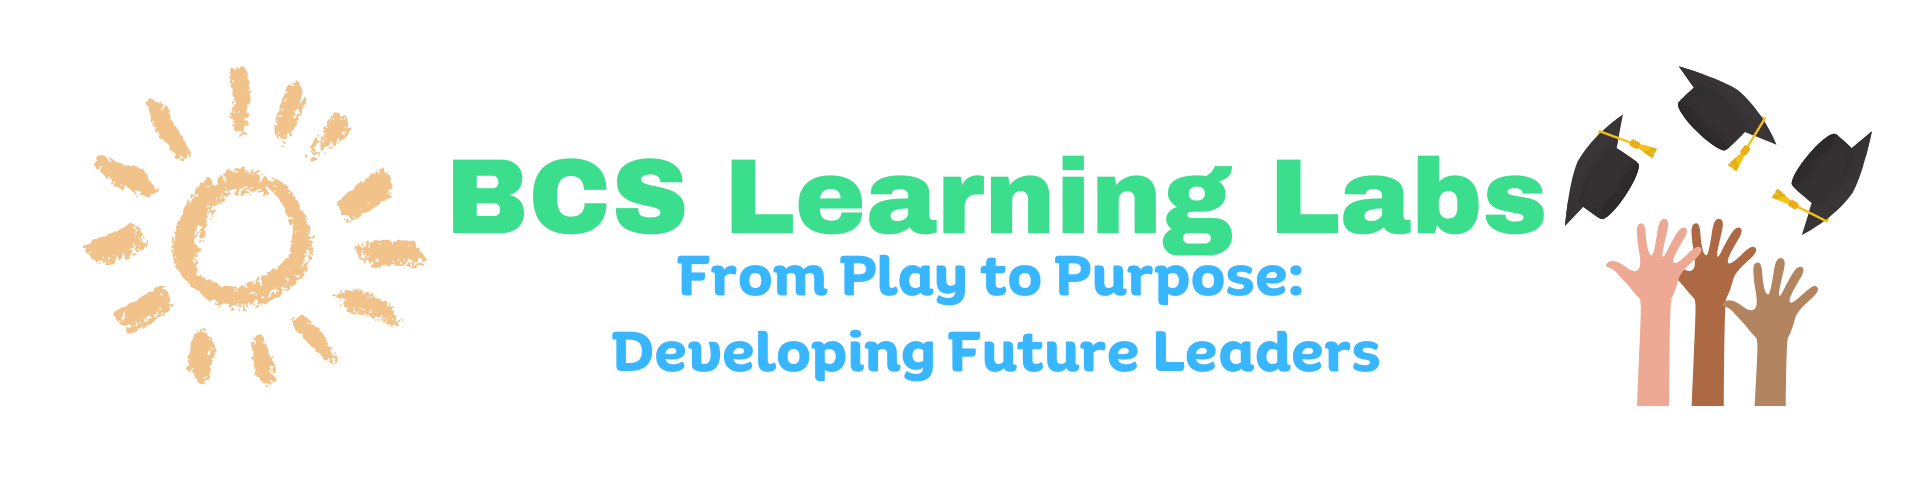 Learning Labs header